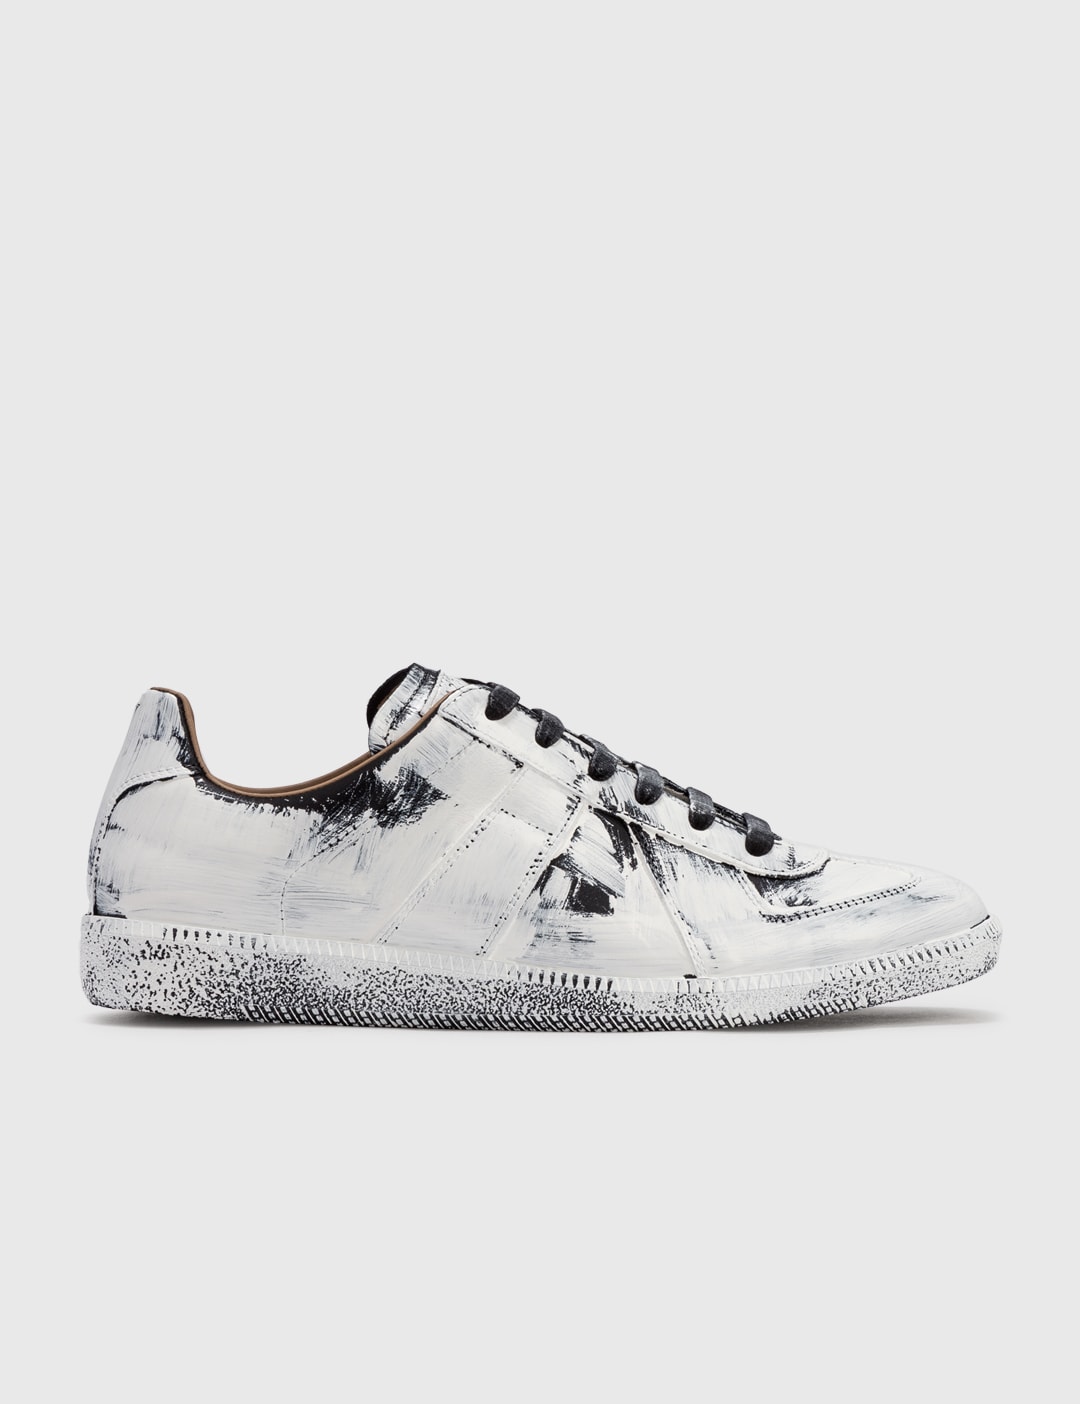 Maison Margiela - Replica White Paint Sneakers | HBX - Globally Curated Fashion and by Hypebeast